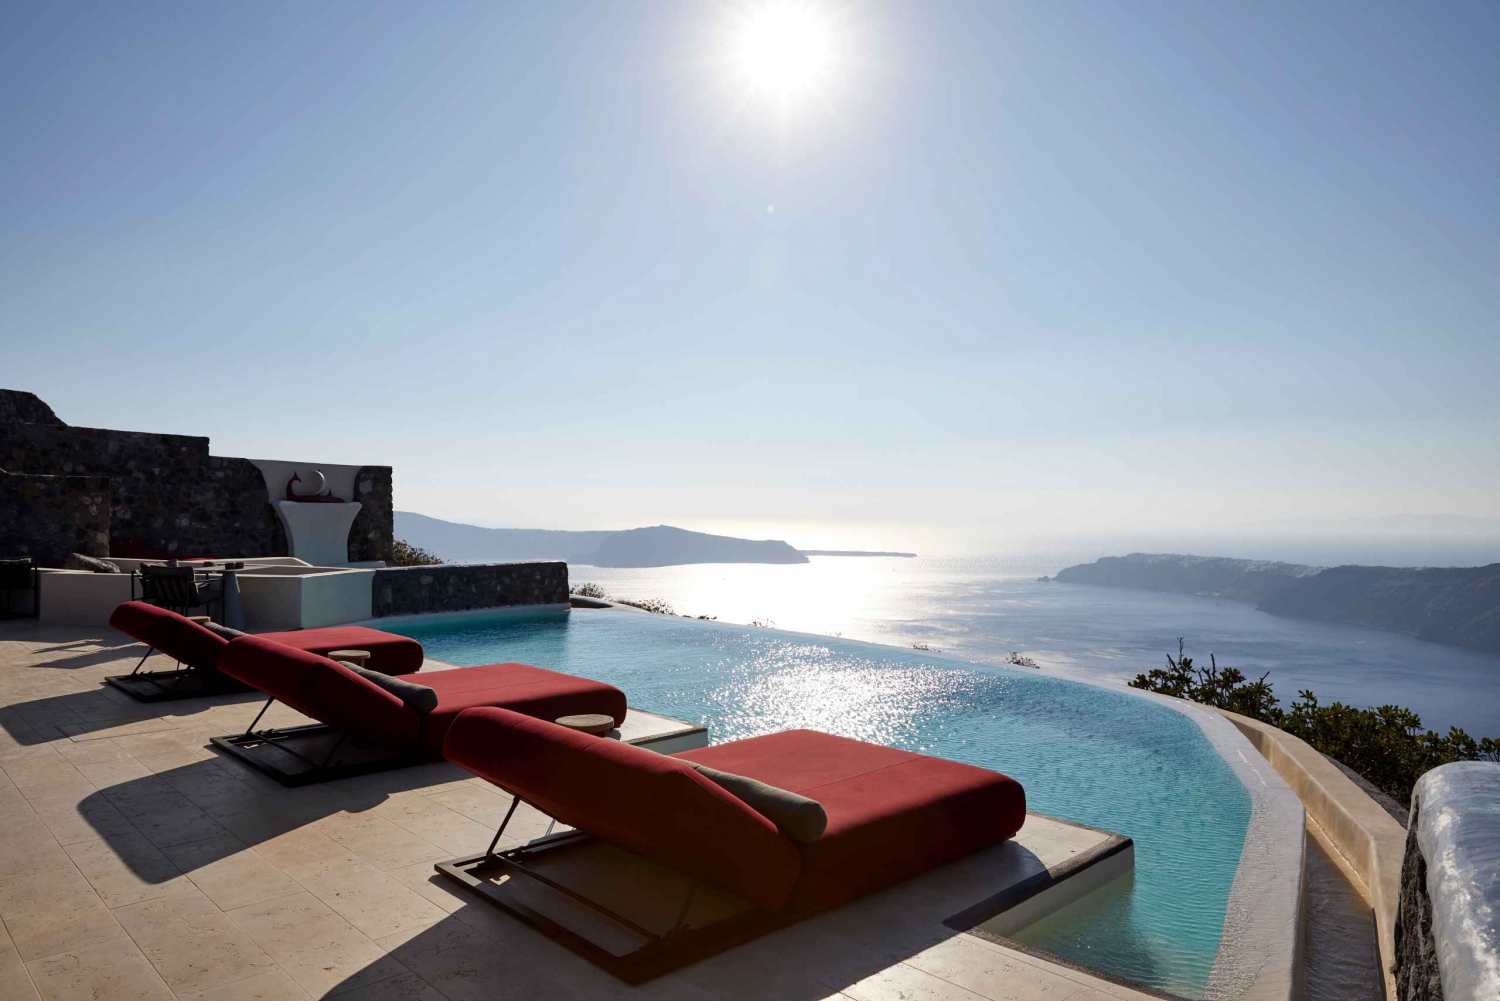 Daybed Relaxation with infinity pool use with caldera views